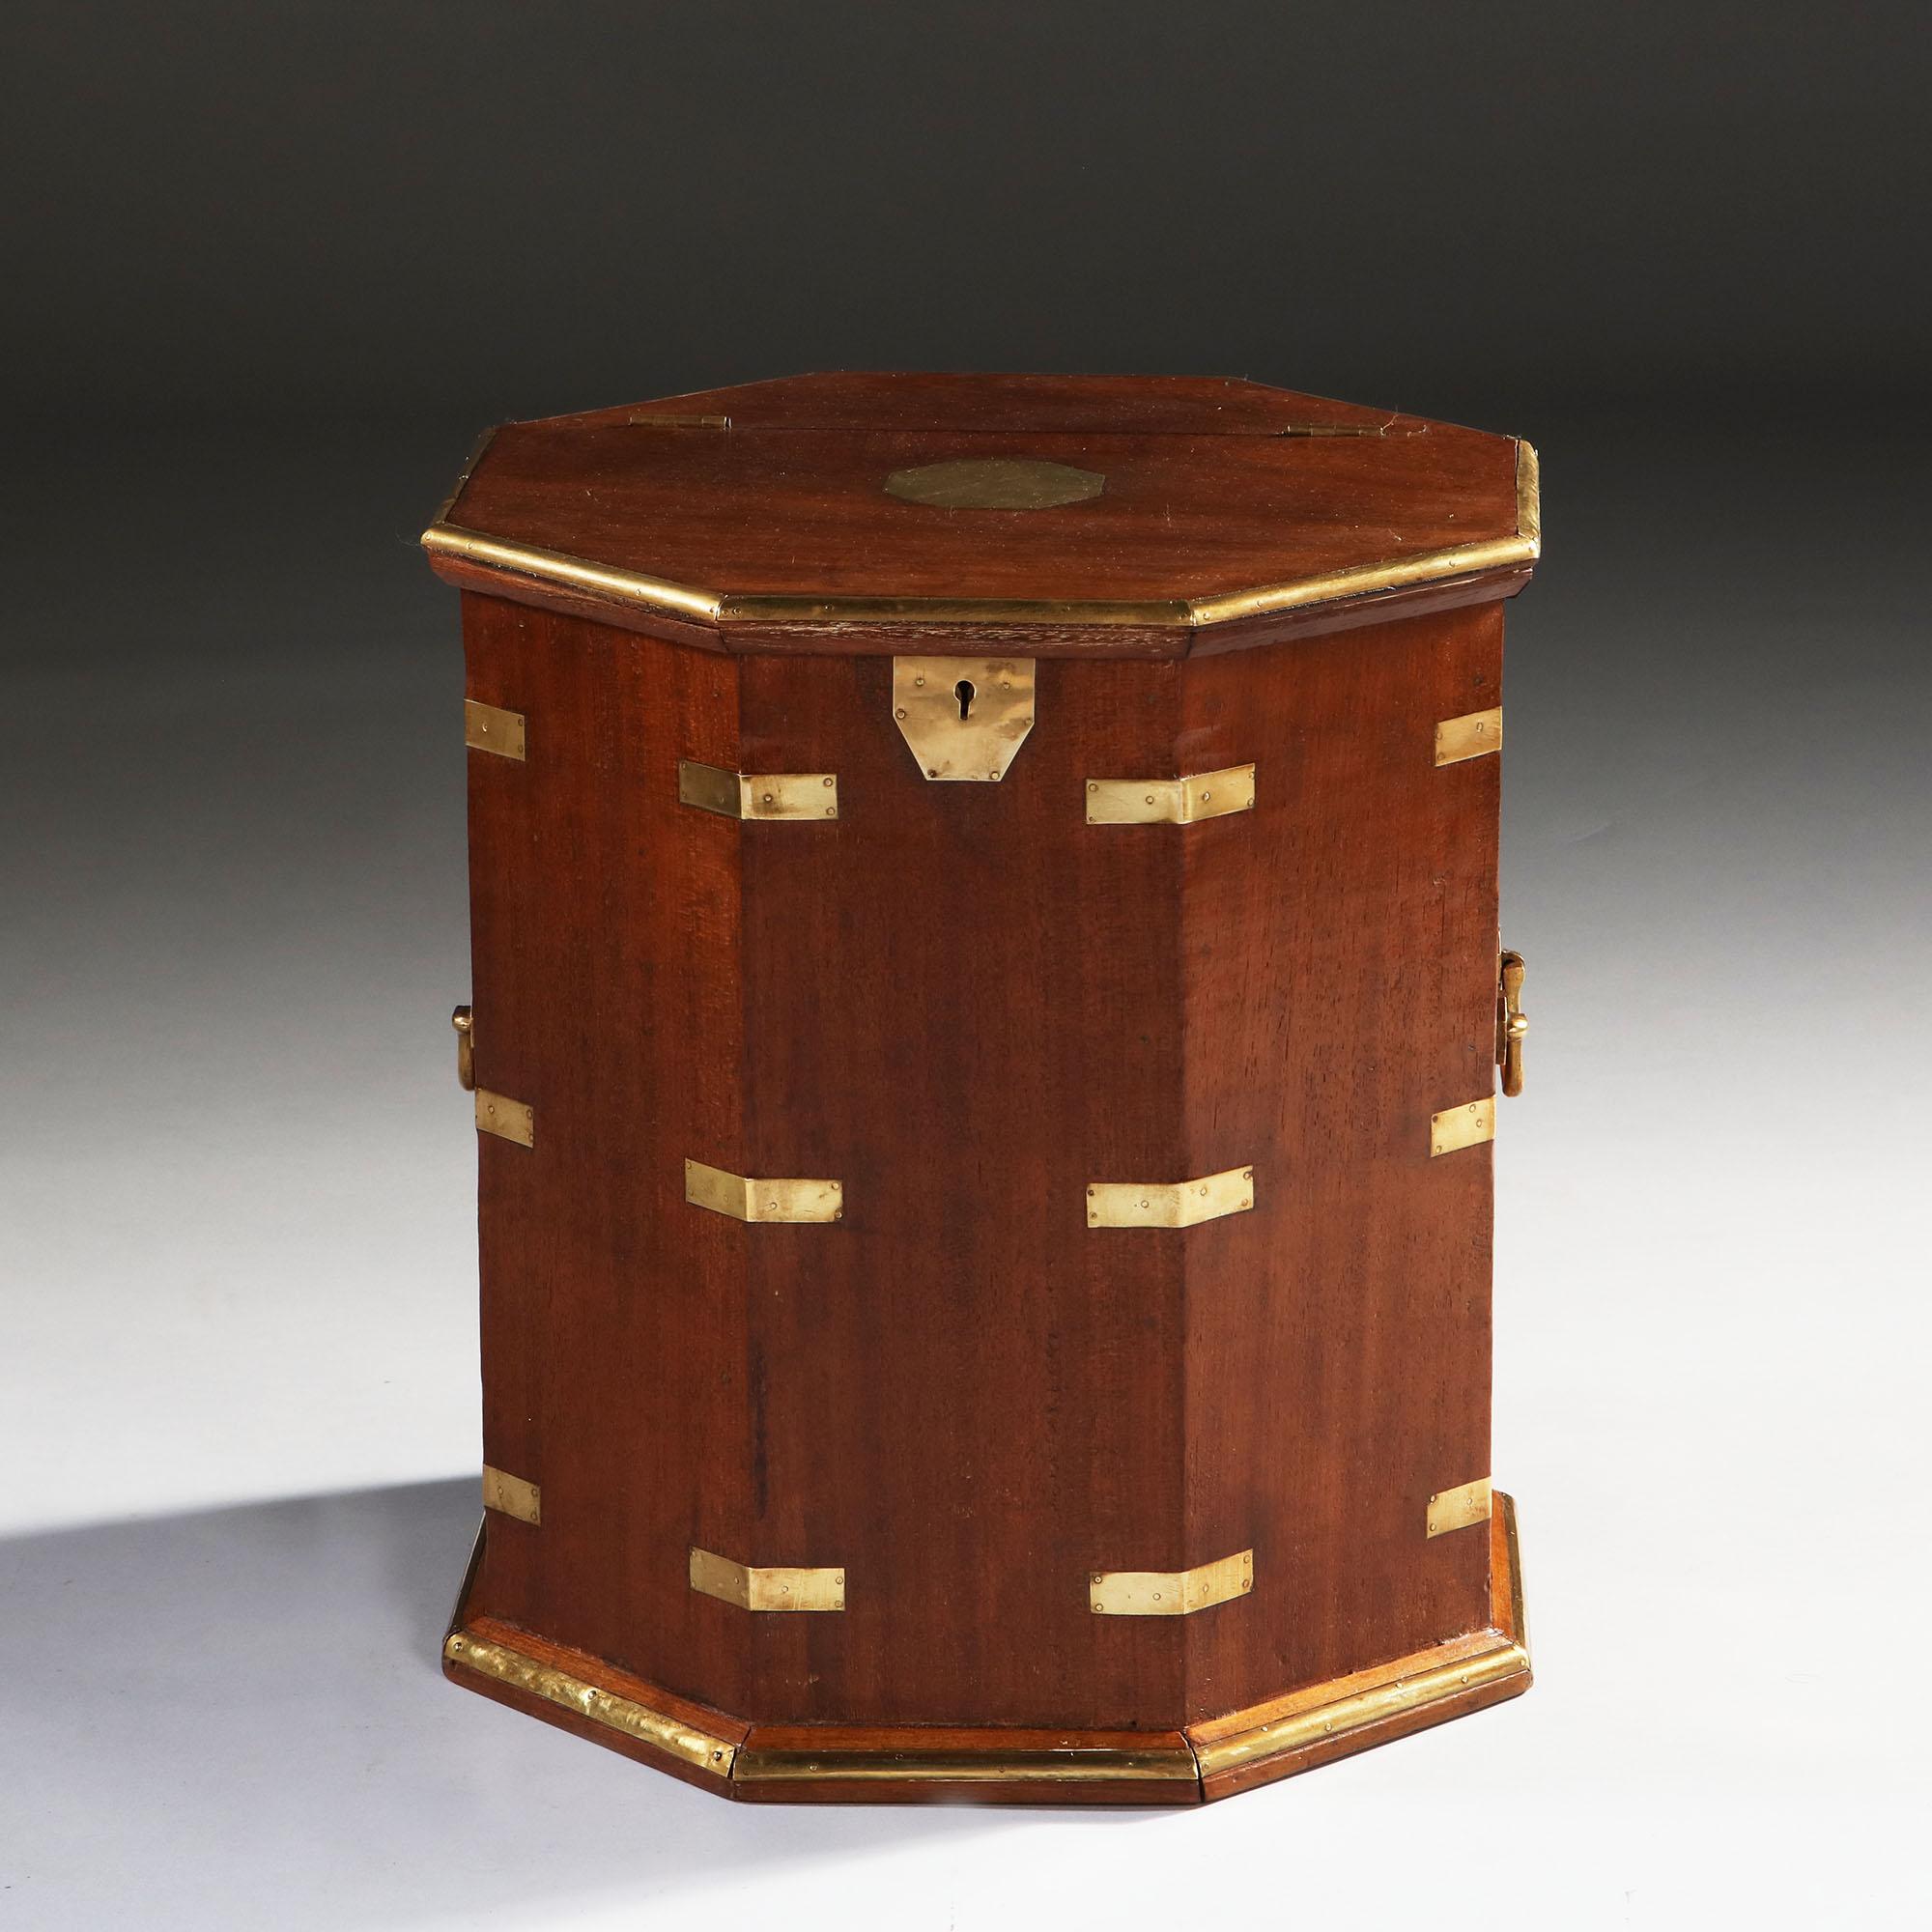 A fine late 19th century hexagonal mahogany Campaign box or occasional table, with brass mounts, handles to each side, and lifting lid.